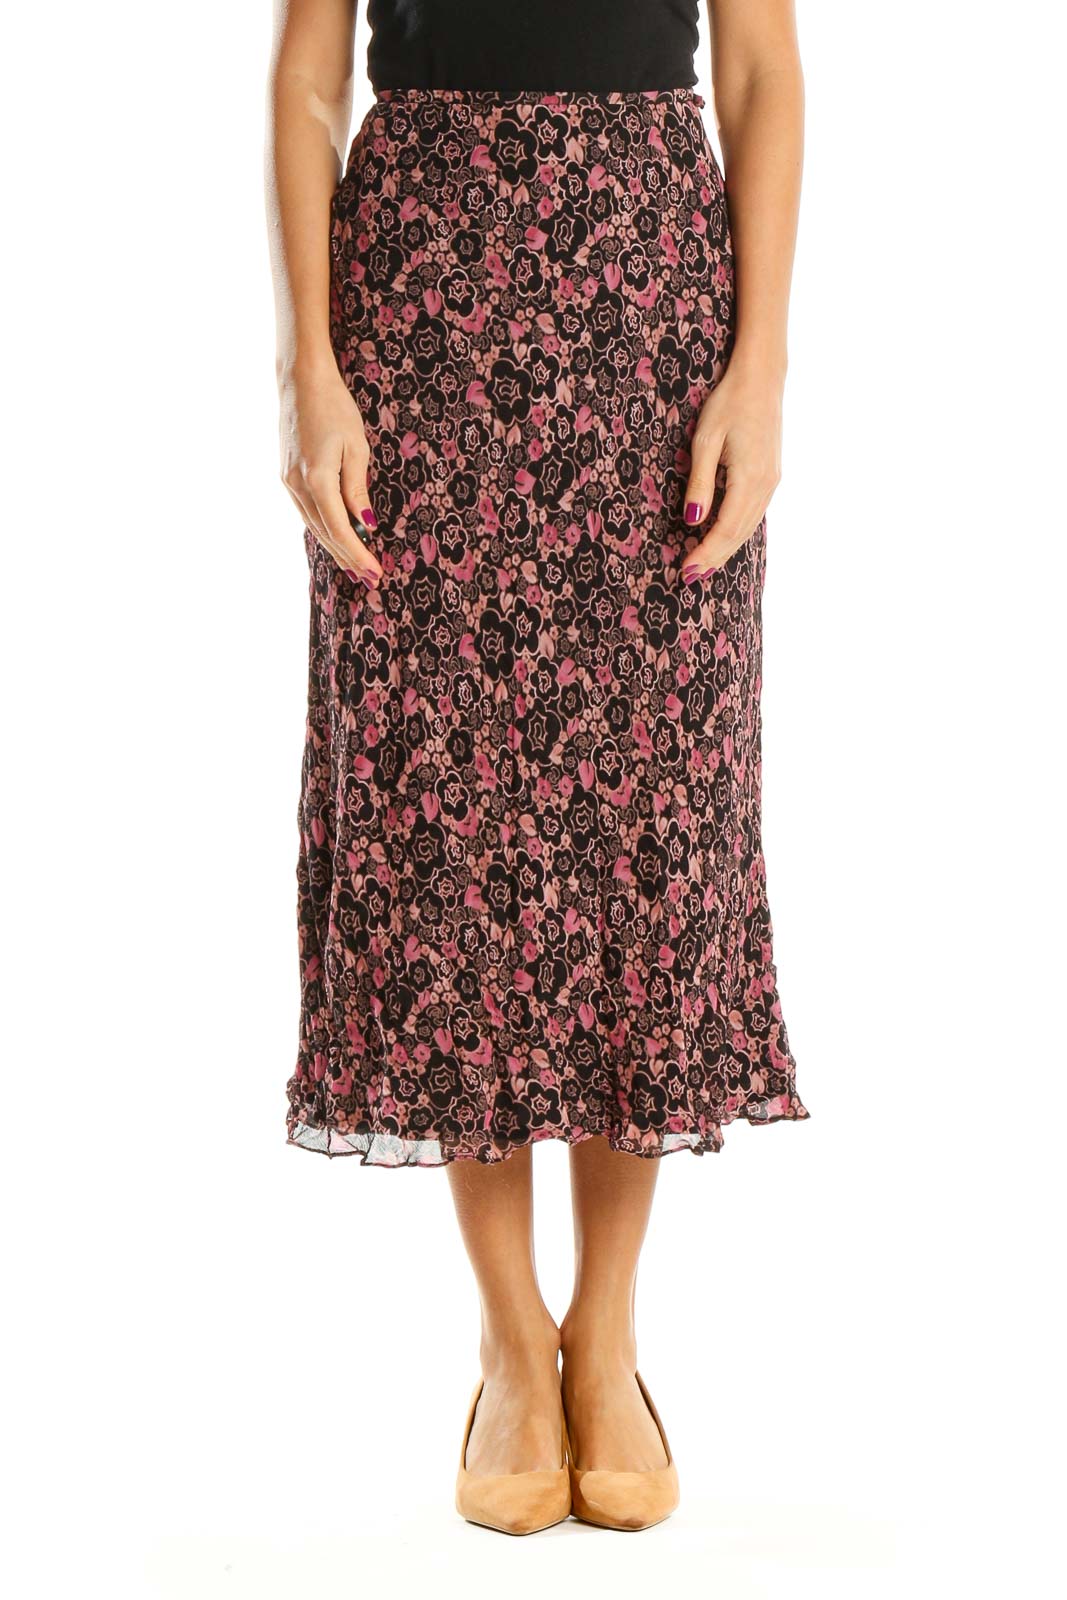 Brown Floral Print Bohemian A-Line Skirt Front